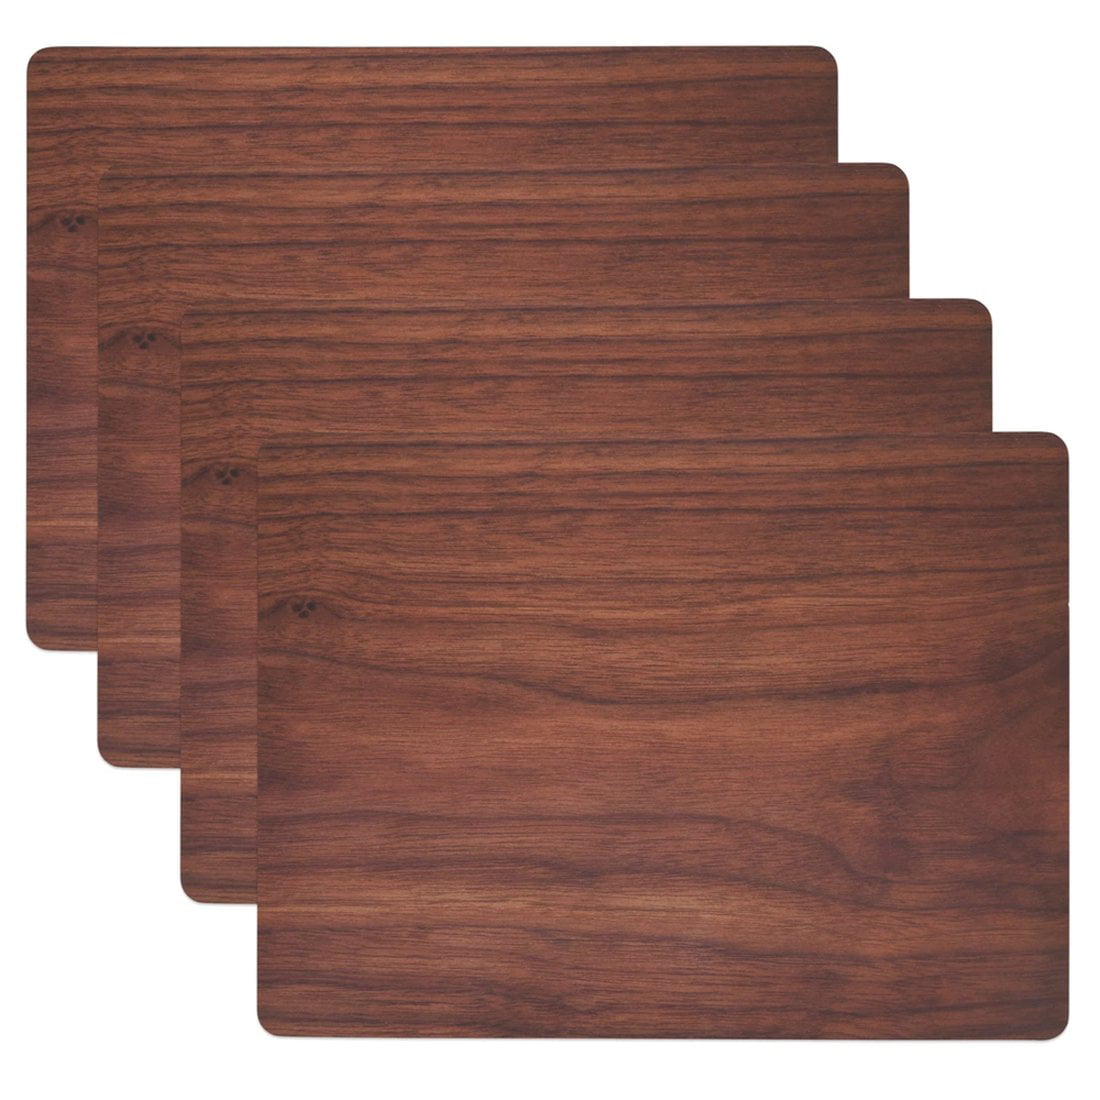 Fennco Styles Unique Engineered Wood Laser Cut Placemats 15 Round, Set of  4 – Brown Modern Traycloth Table Mats for Home, Dining Room Décor